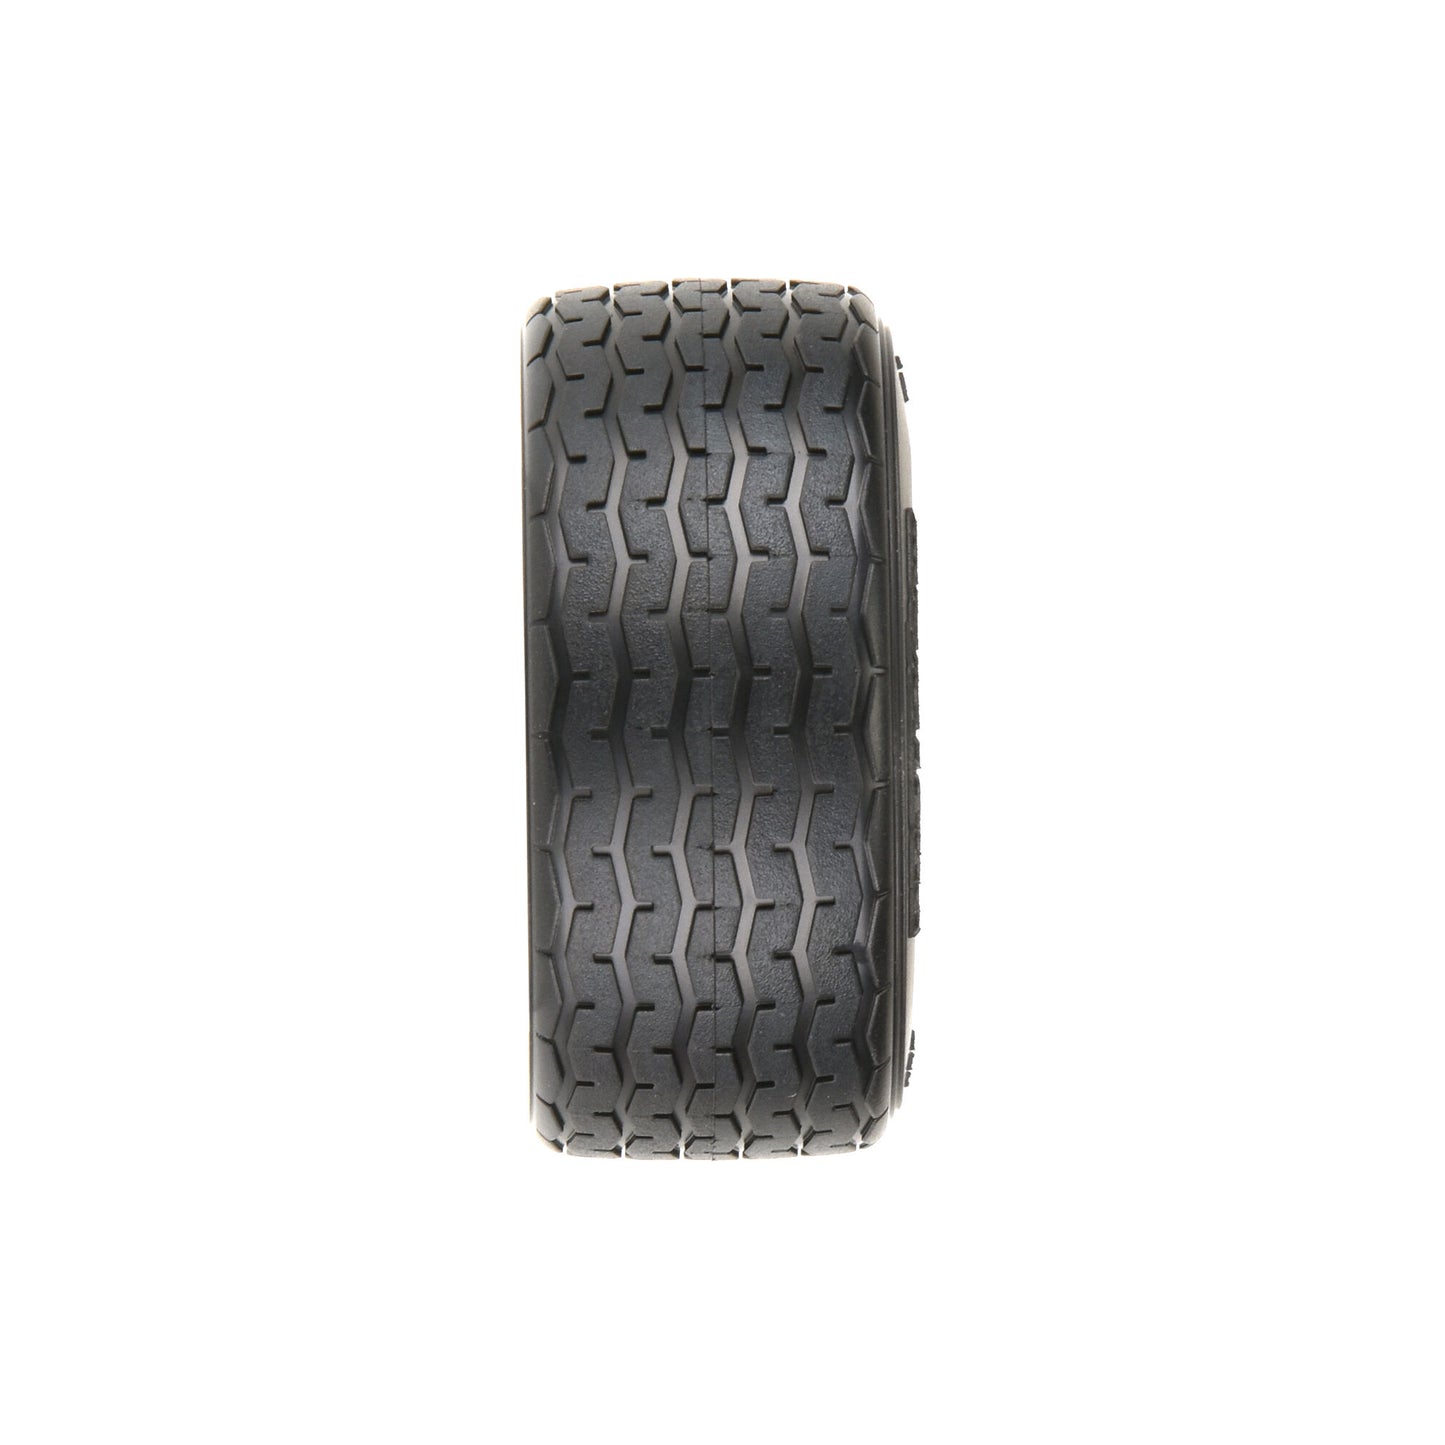 VTA Front Tire, 26mm, Mounted